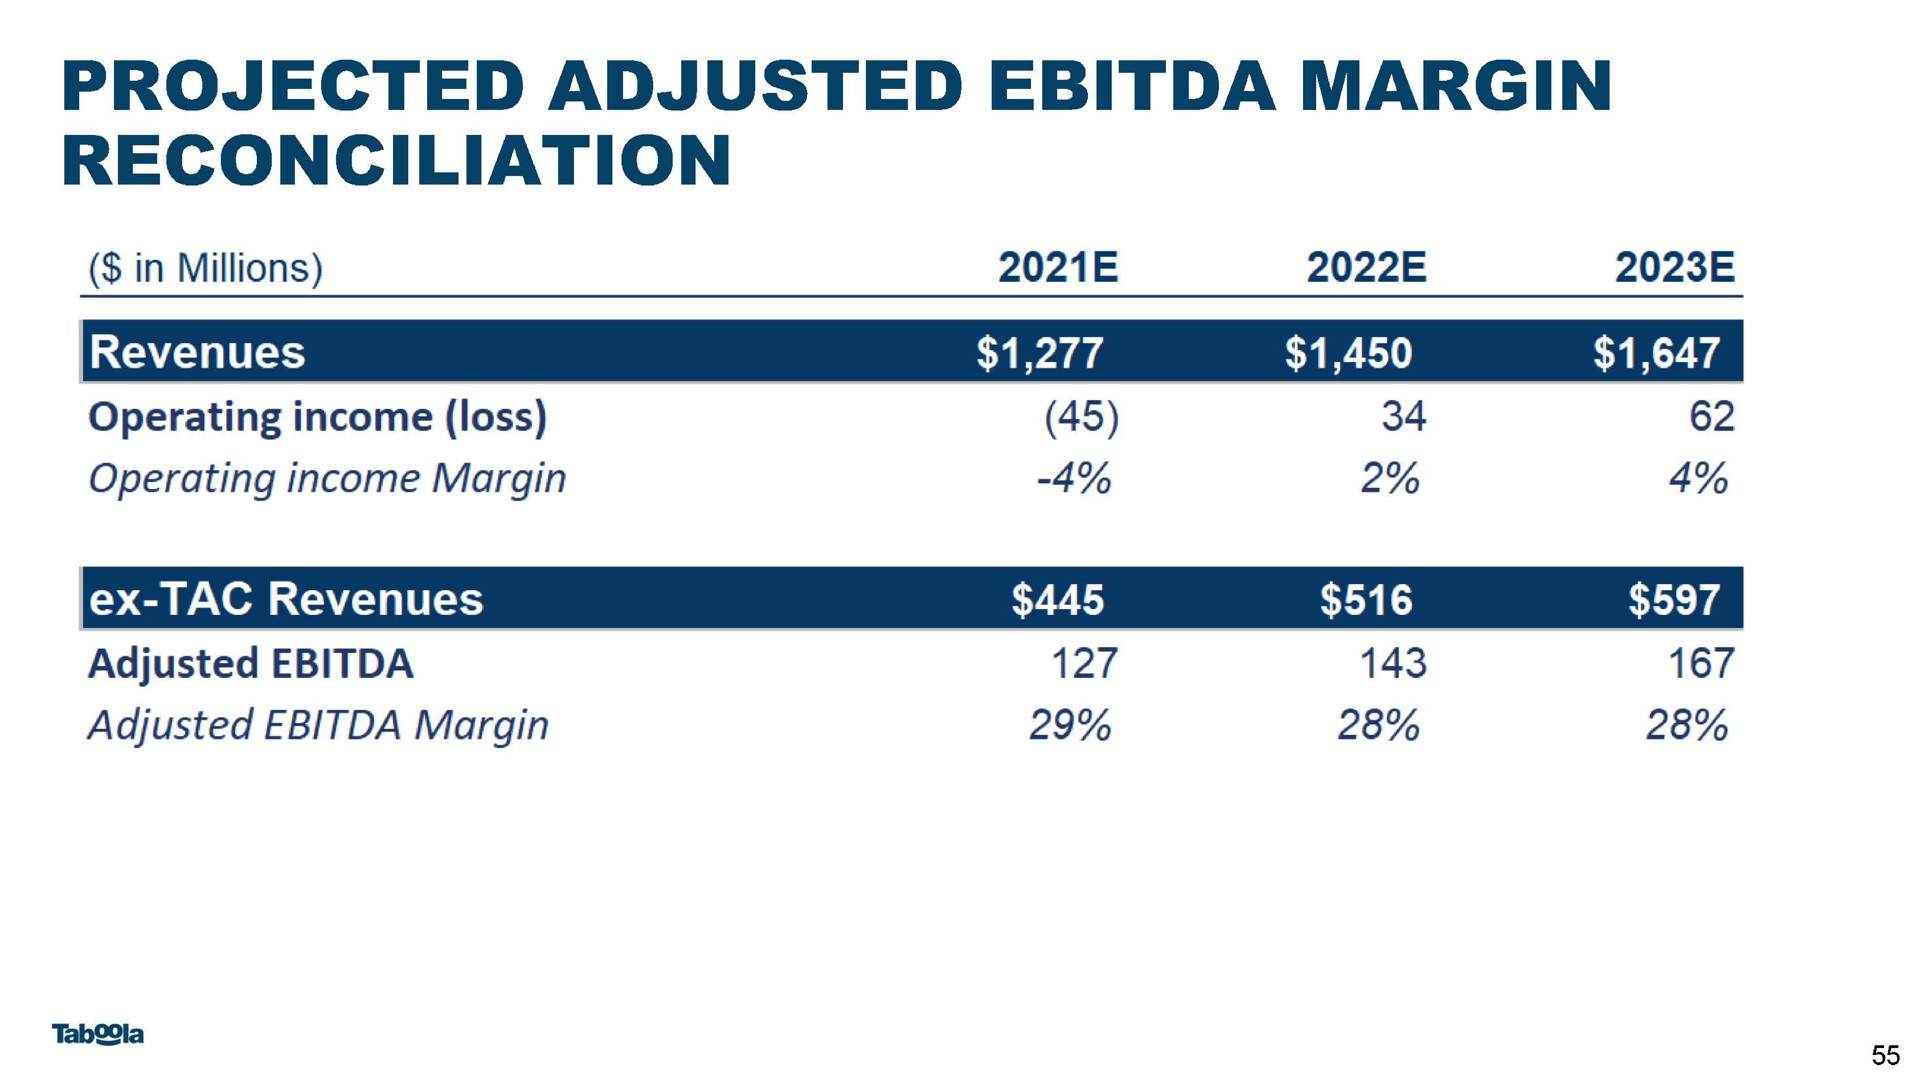 projected adjusted margin reconciliation | Taboola